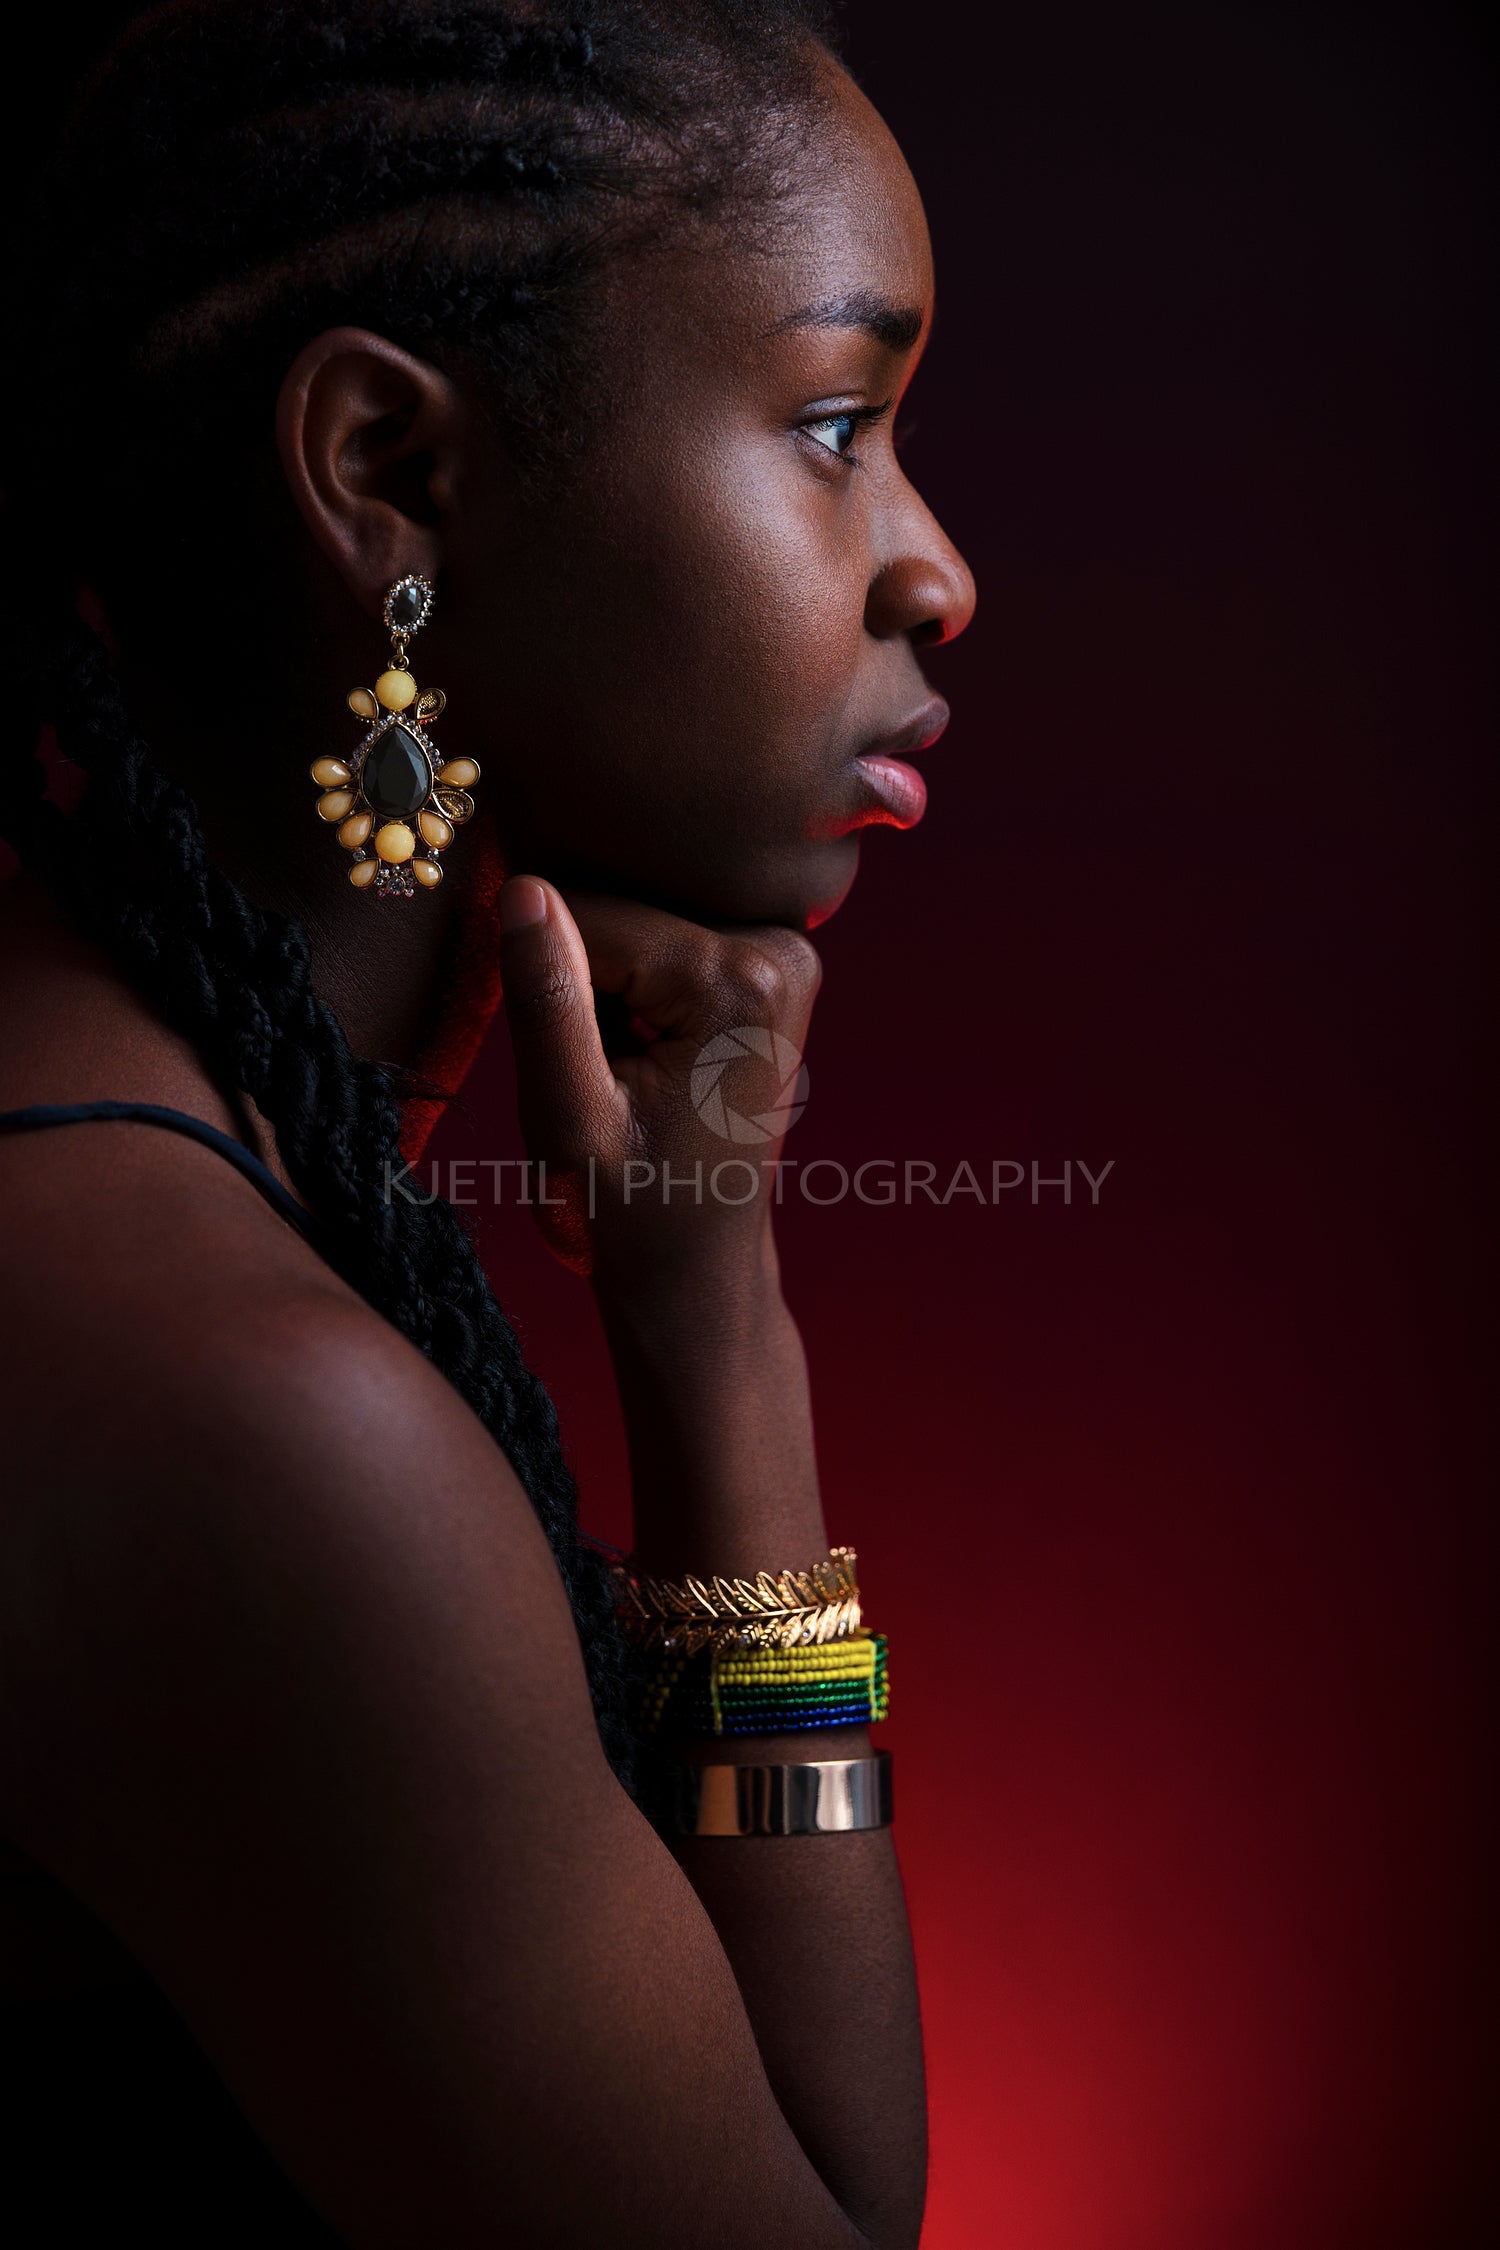 Colorful and creative side view portrait of african woman with dark skin